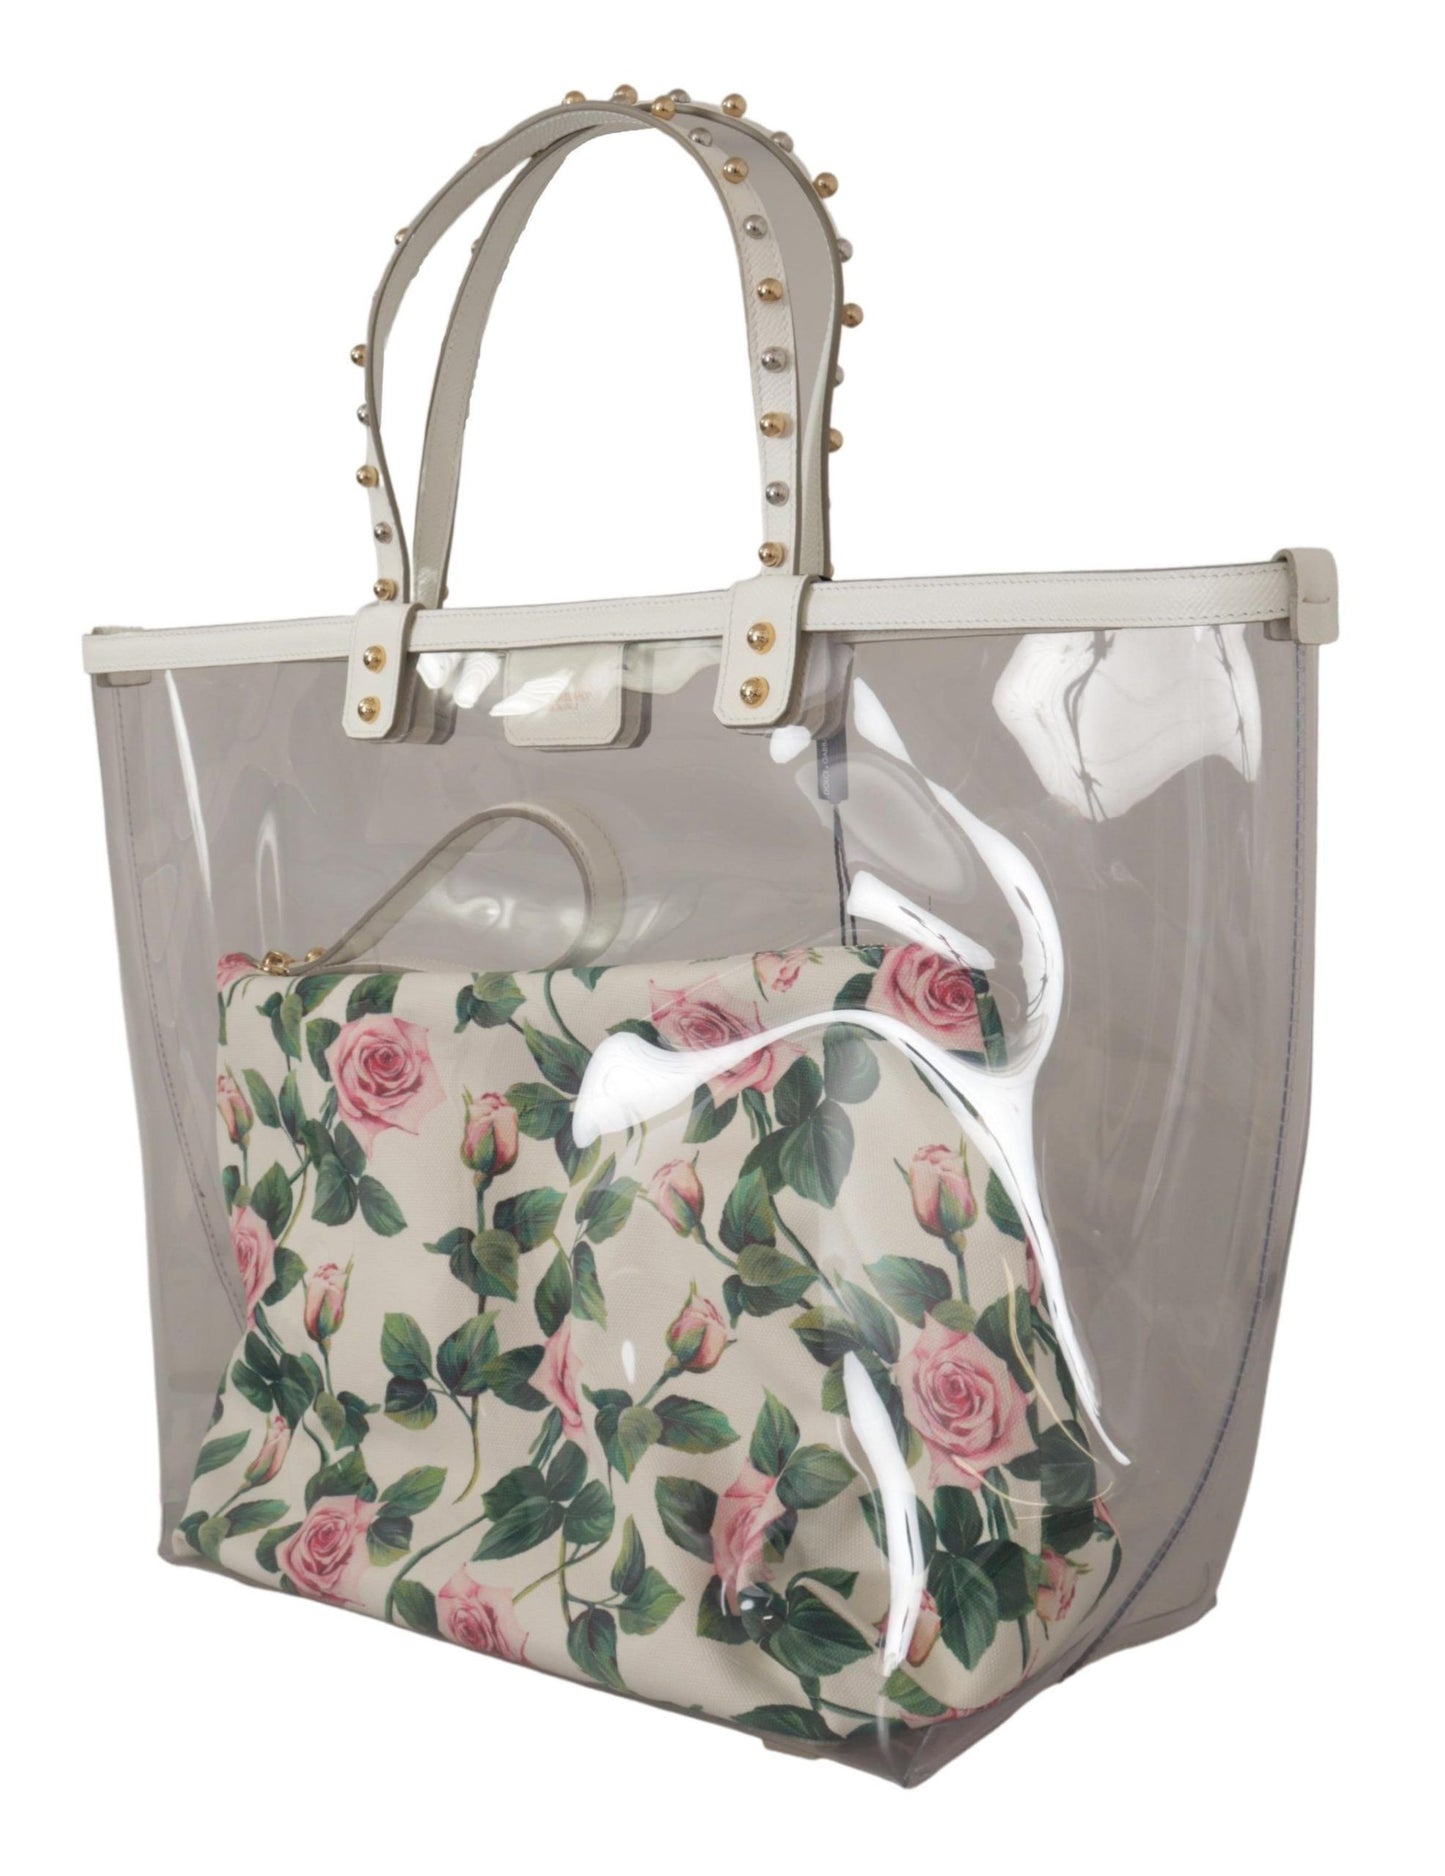 Chic Floral Clutch-Infused Tote for Sophisticated Style